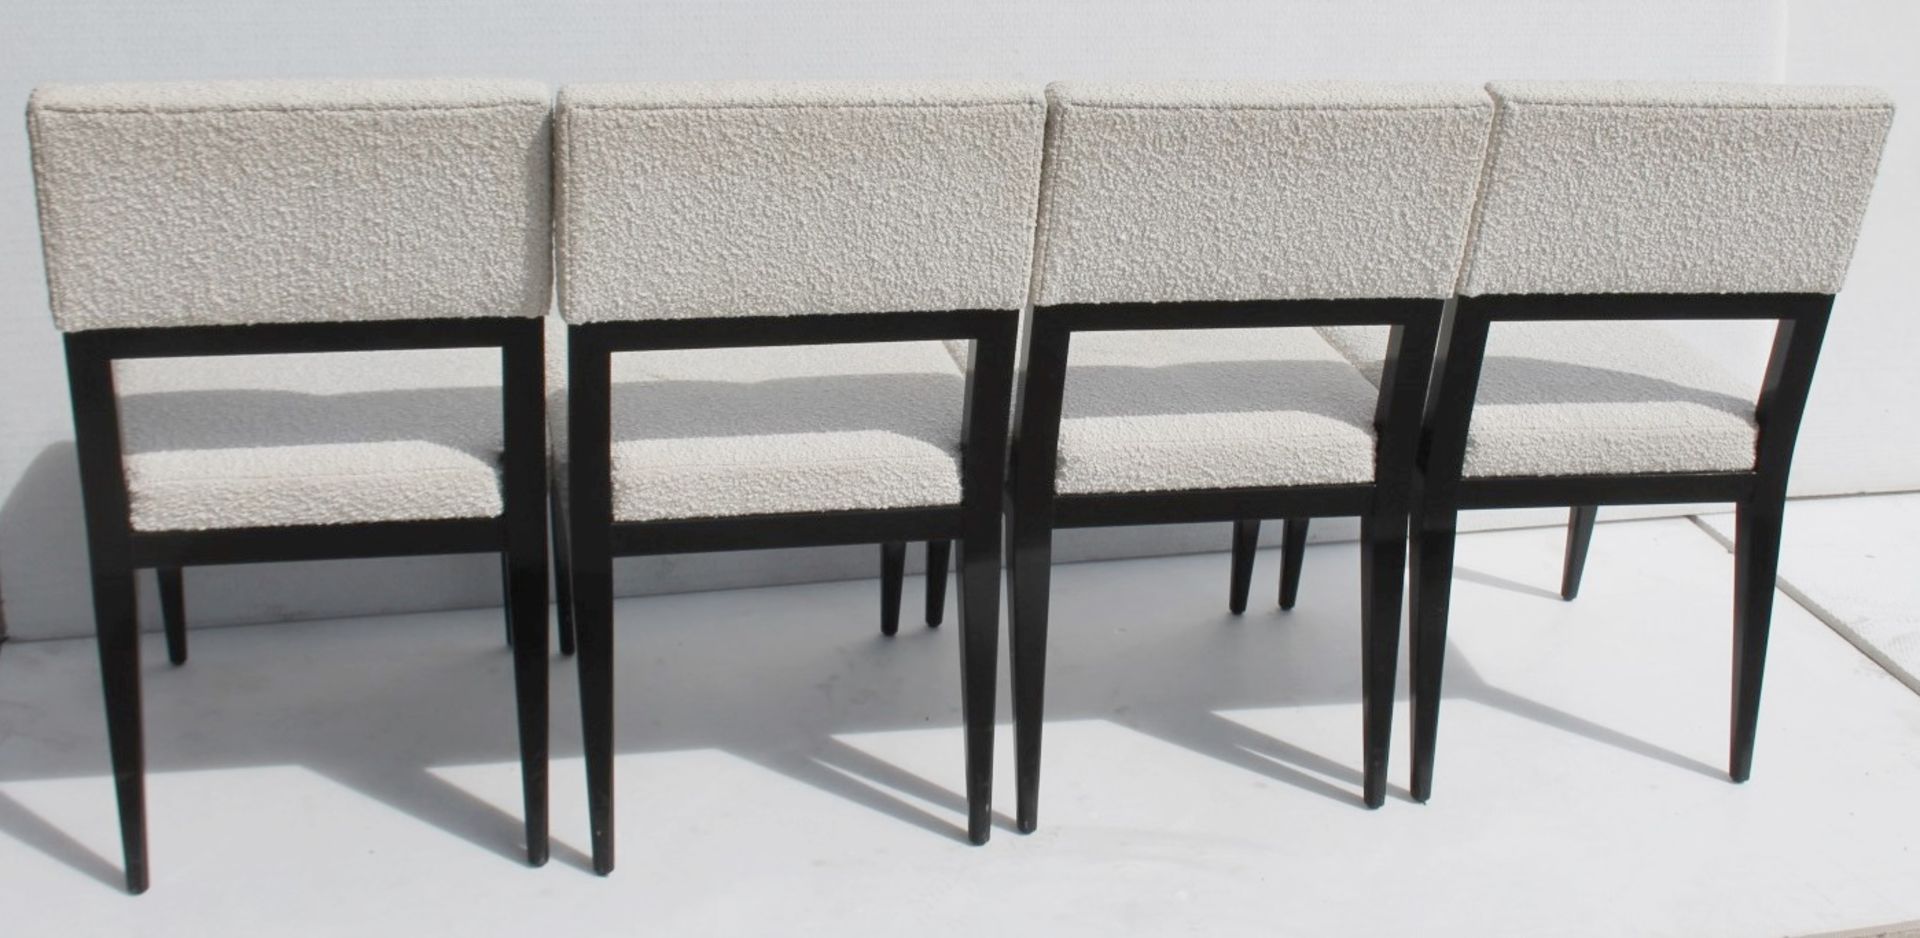 8 x AMY SOMERVILLE LONDON 'Resplendent' Bespoke Dining Chairs - Total Original Price £25,920 - Image 16 of 18